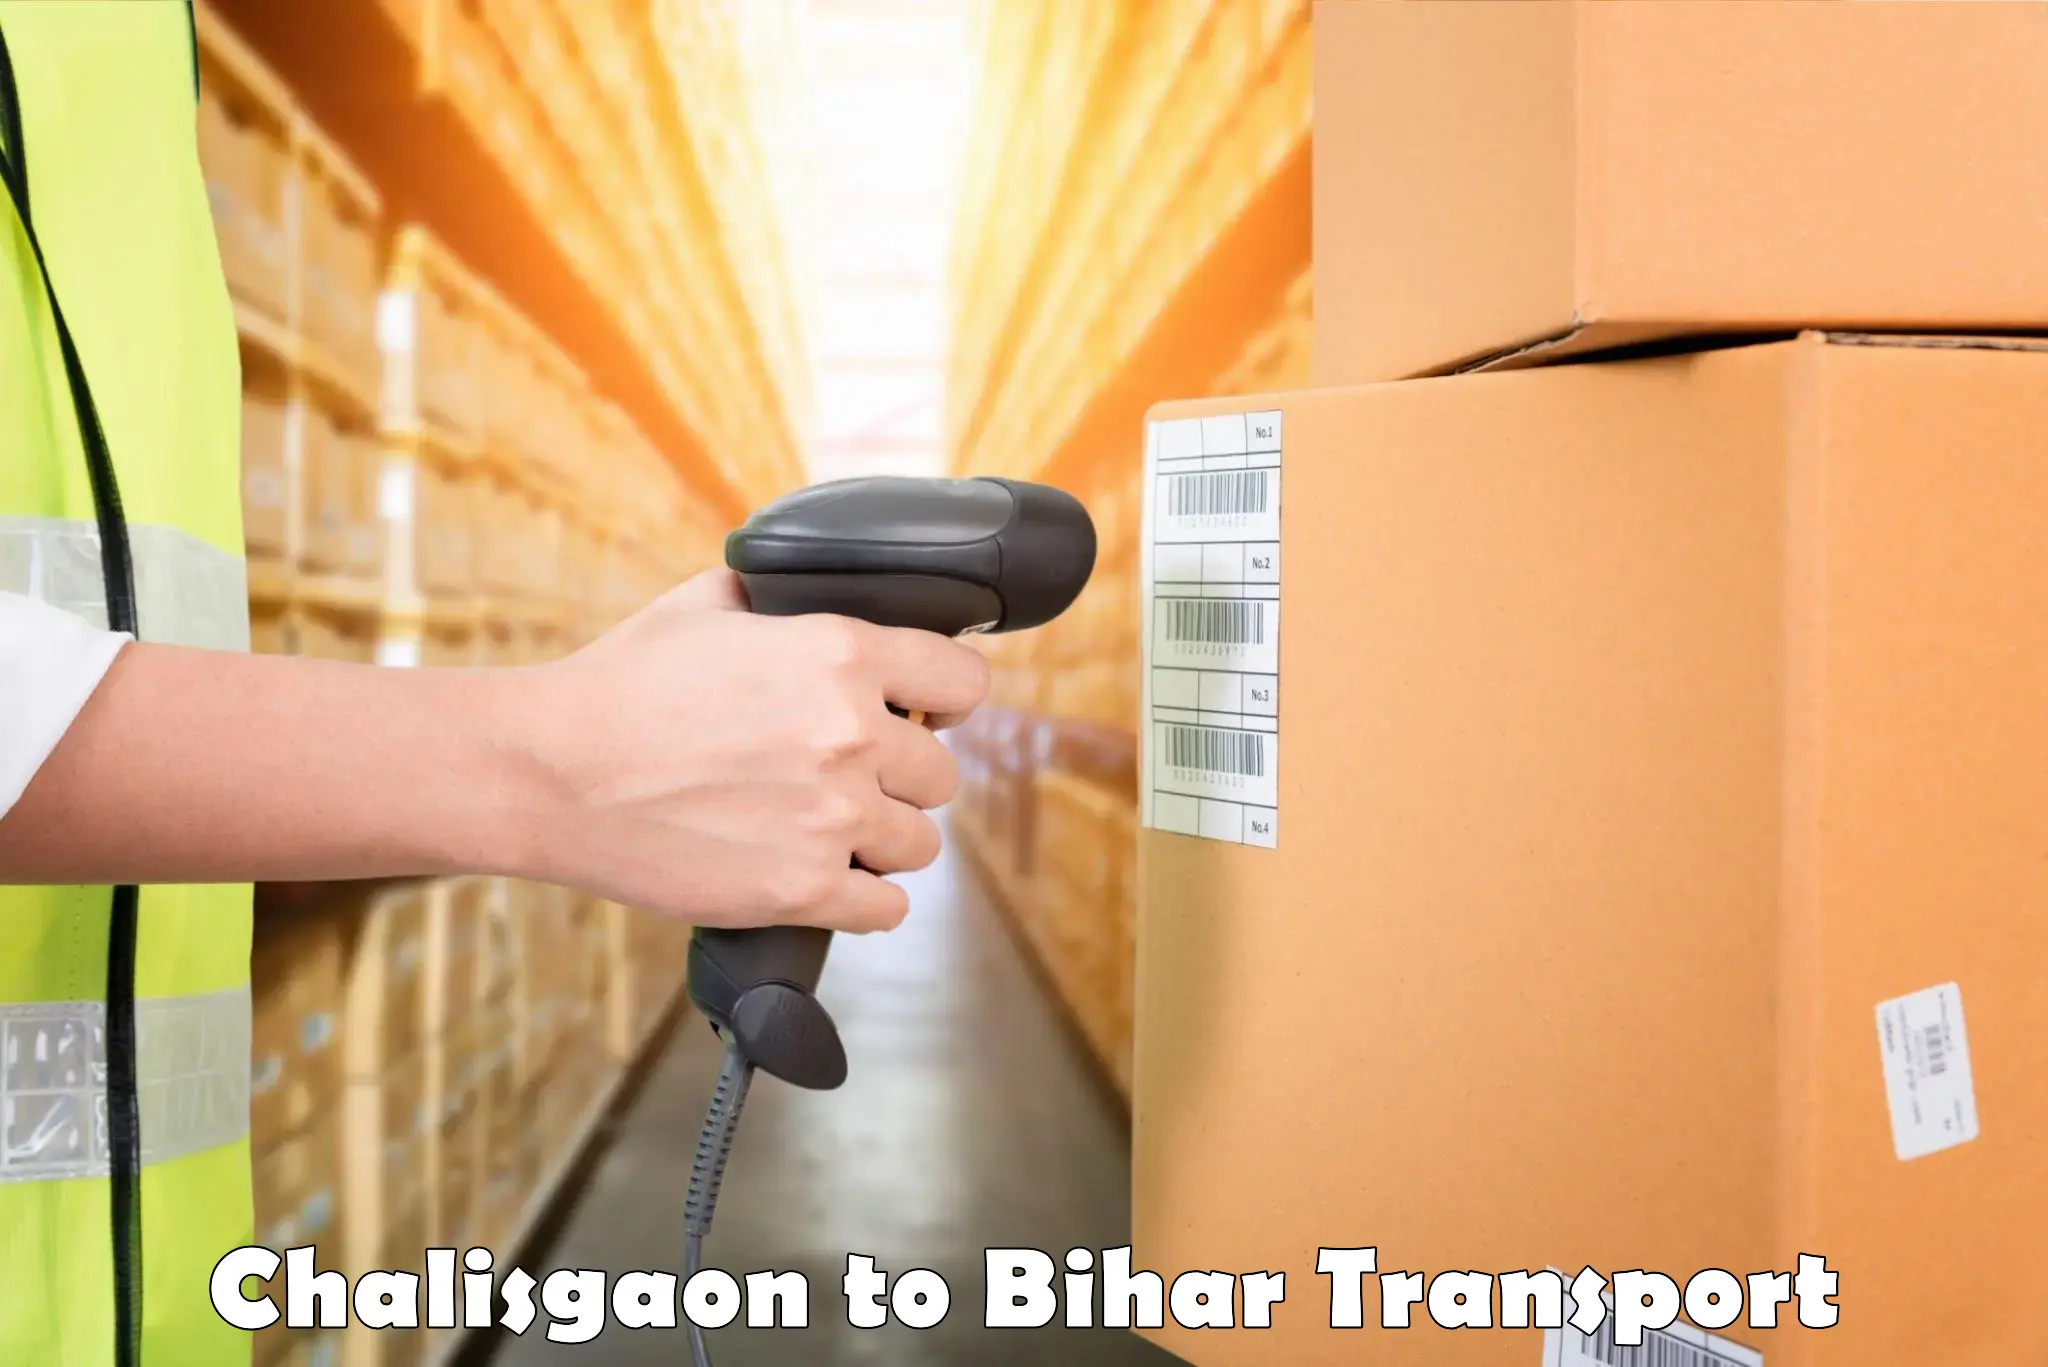 Luggage transport services in Chalisgaon to Sikandara Jamui